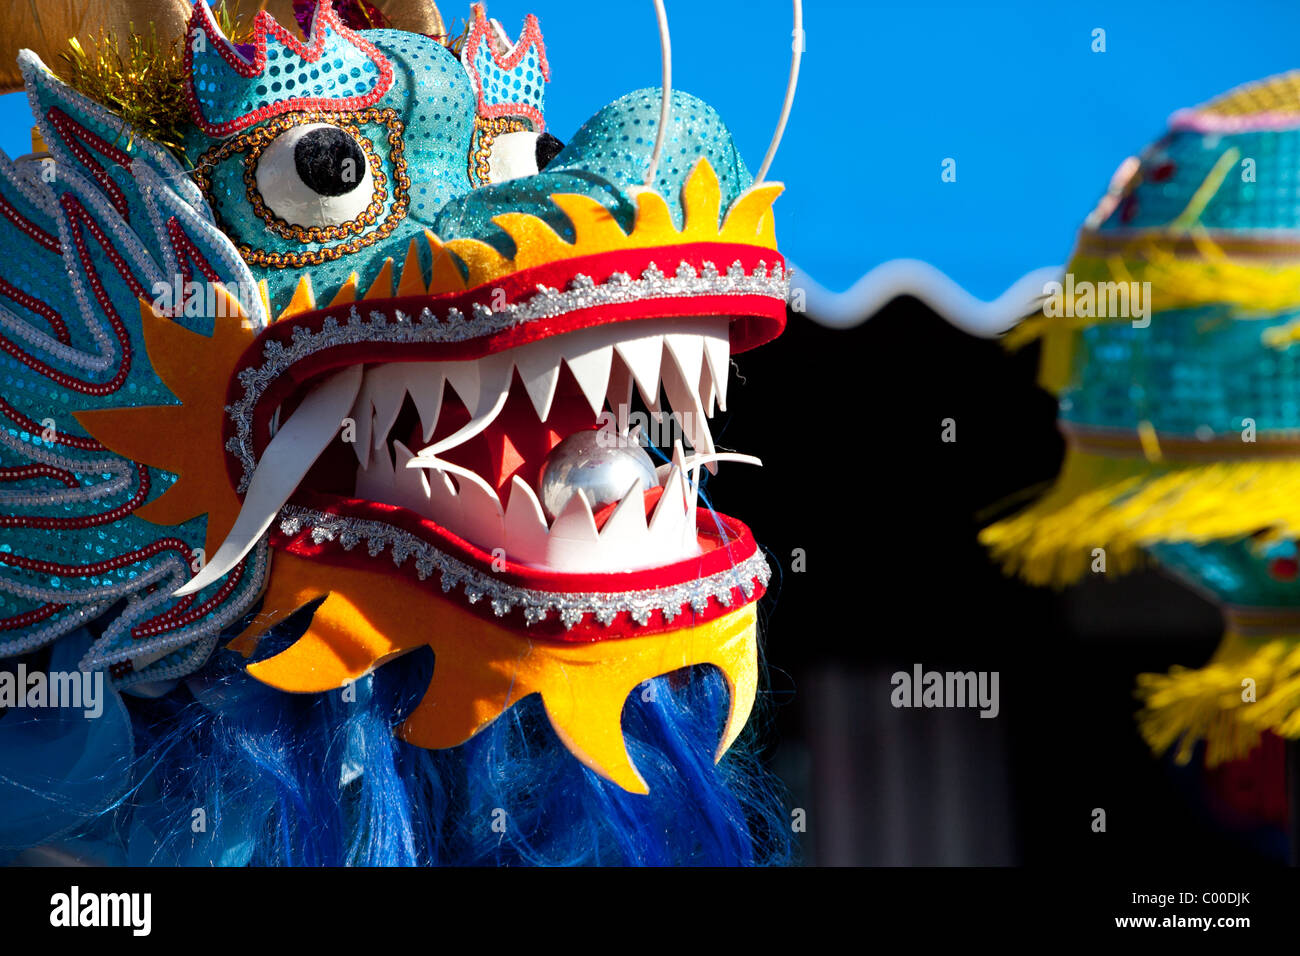 A blue Chinese Dragon at a Chinese Lunar New Year Celebration Stock Photo